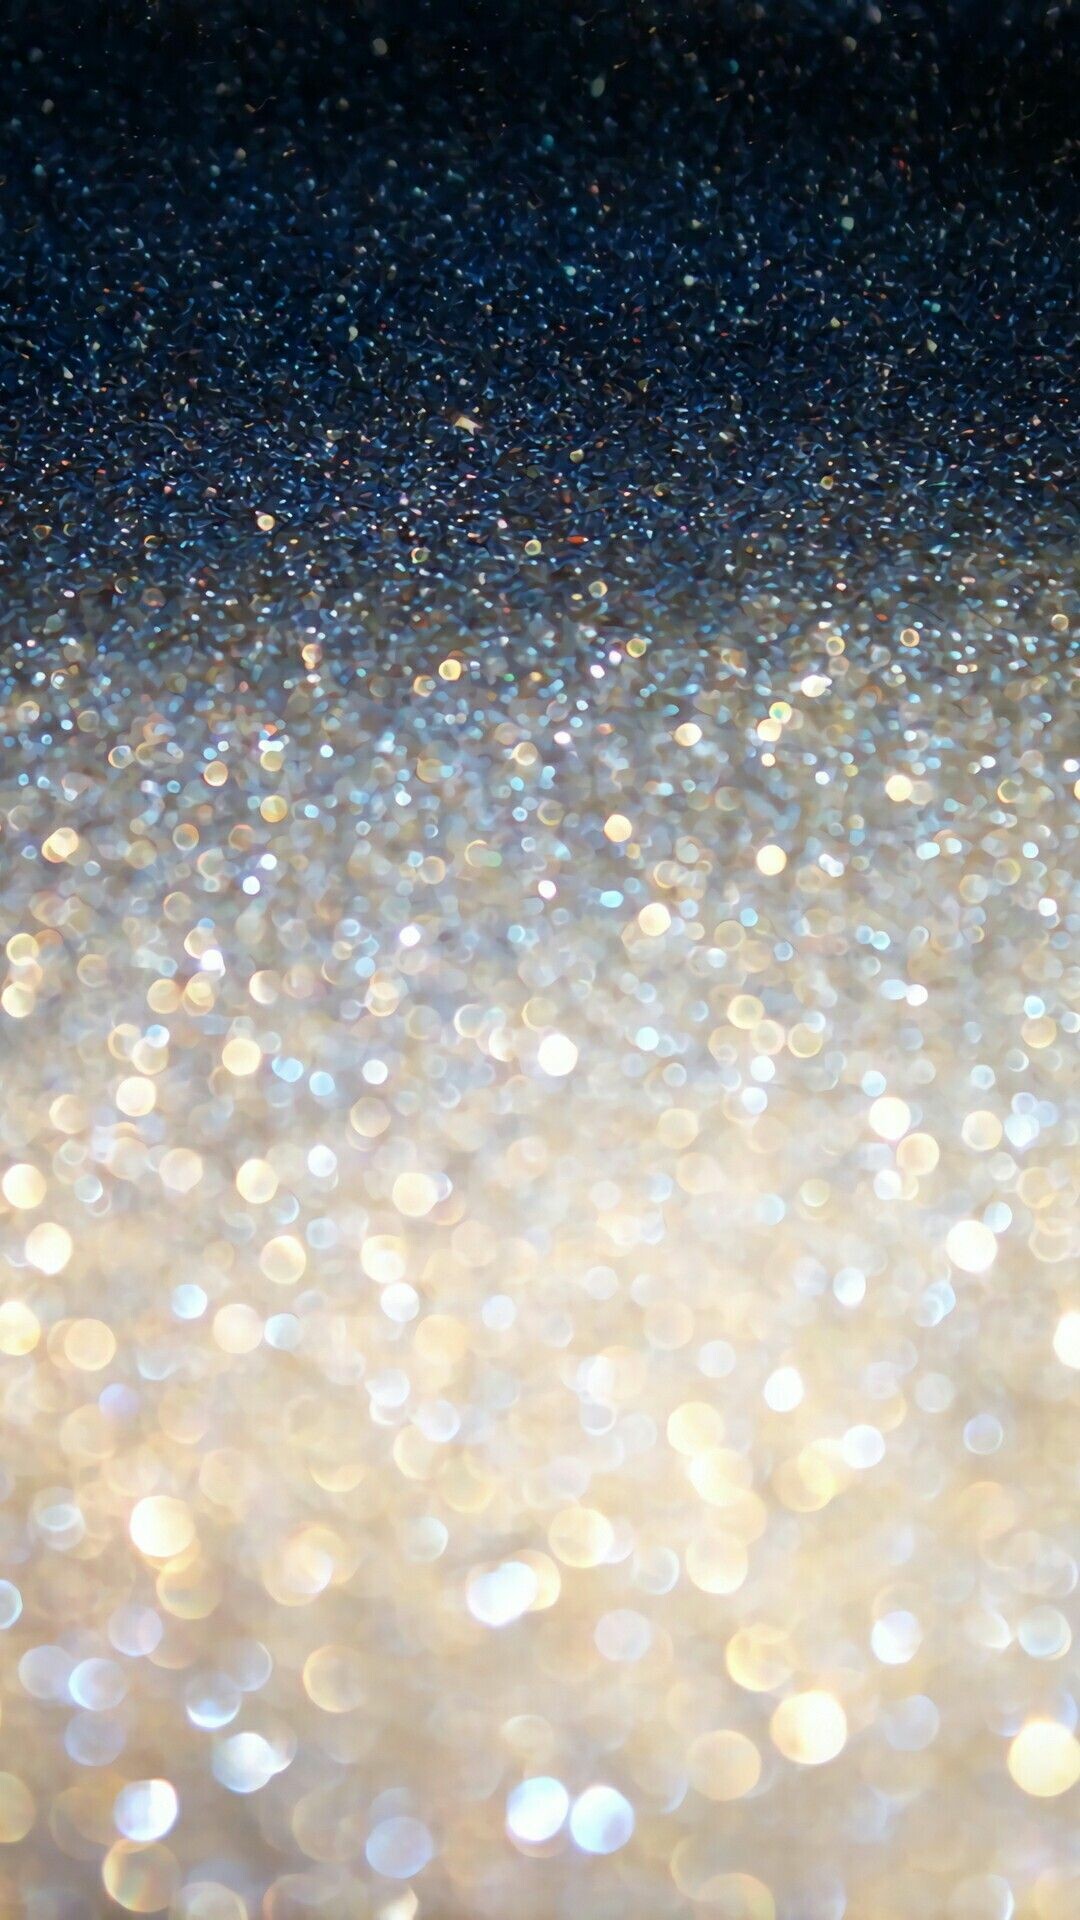 Sparkle: Used for glitter bombing, which is an act of protest. 1080x1920 Full HD Wallpaper.